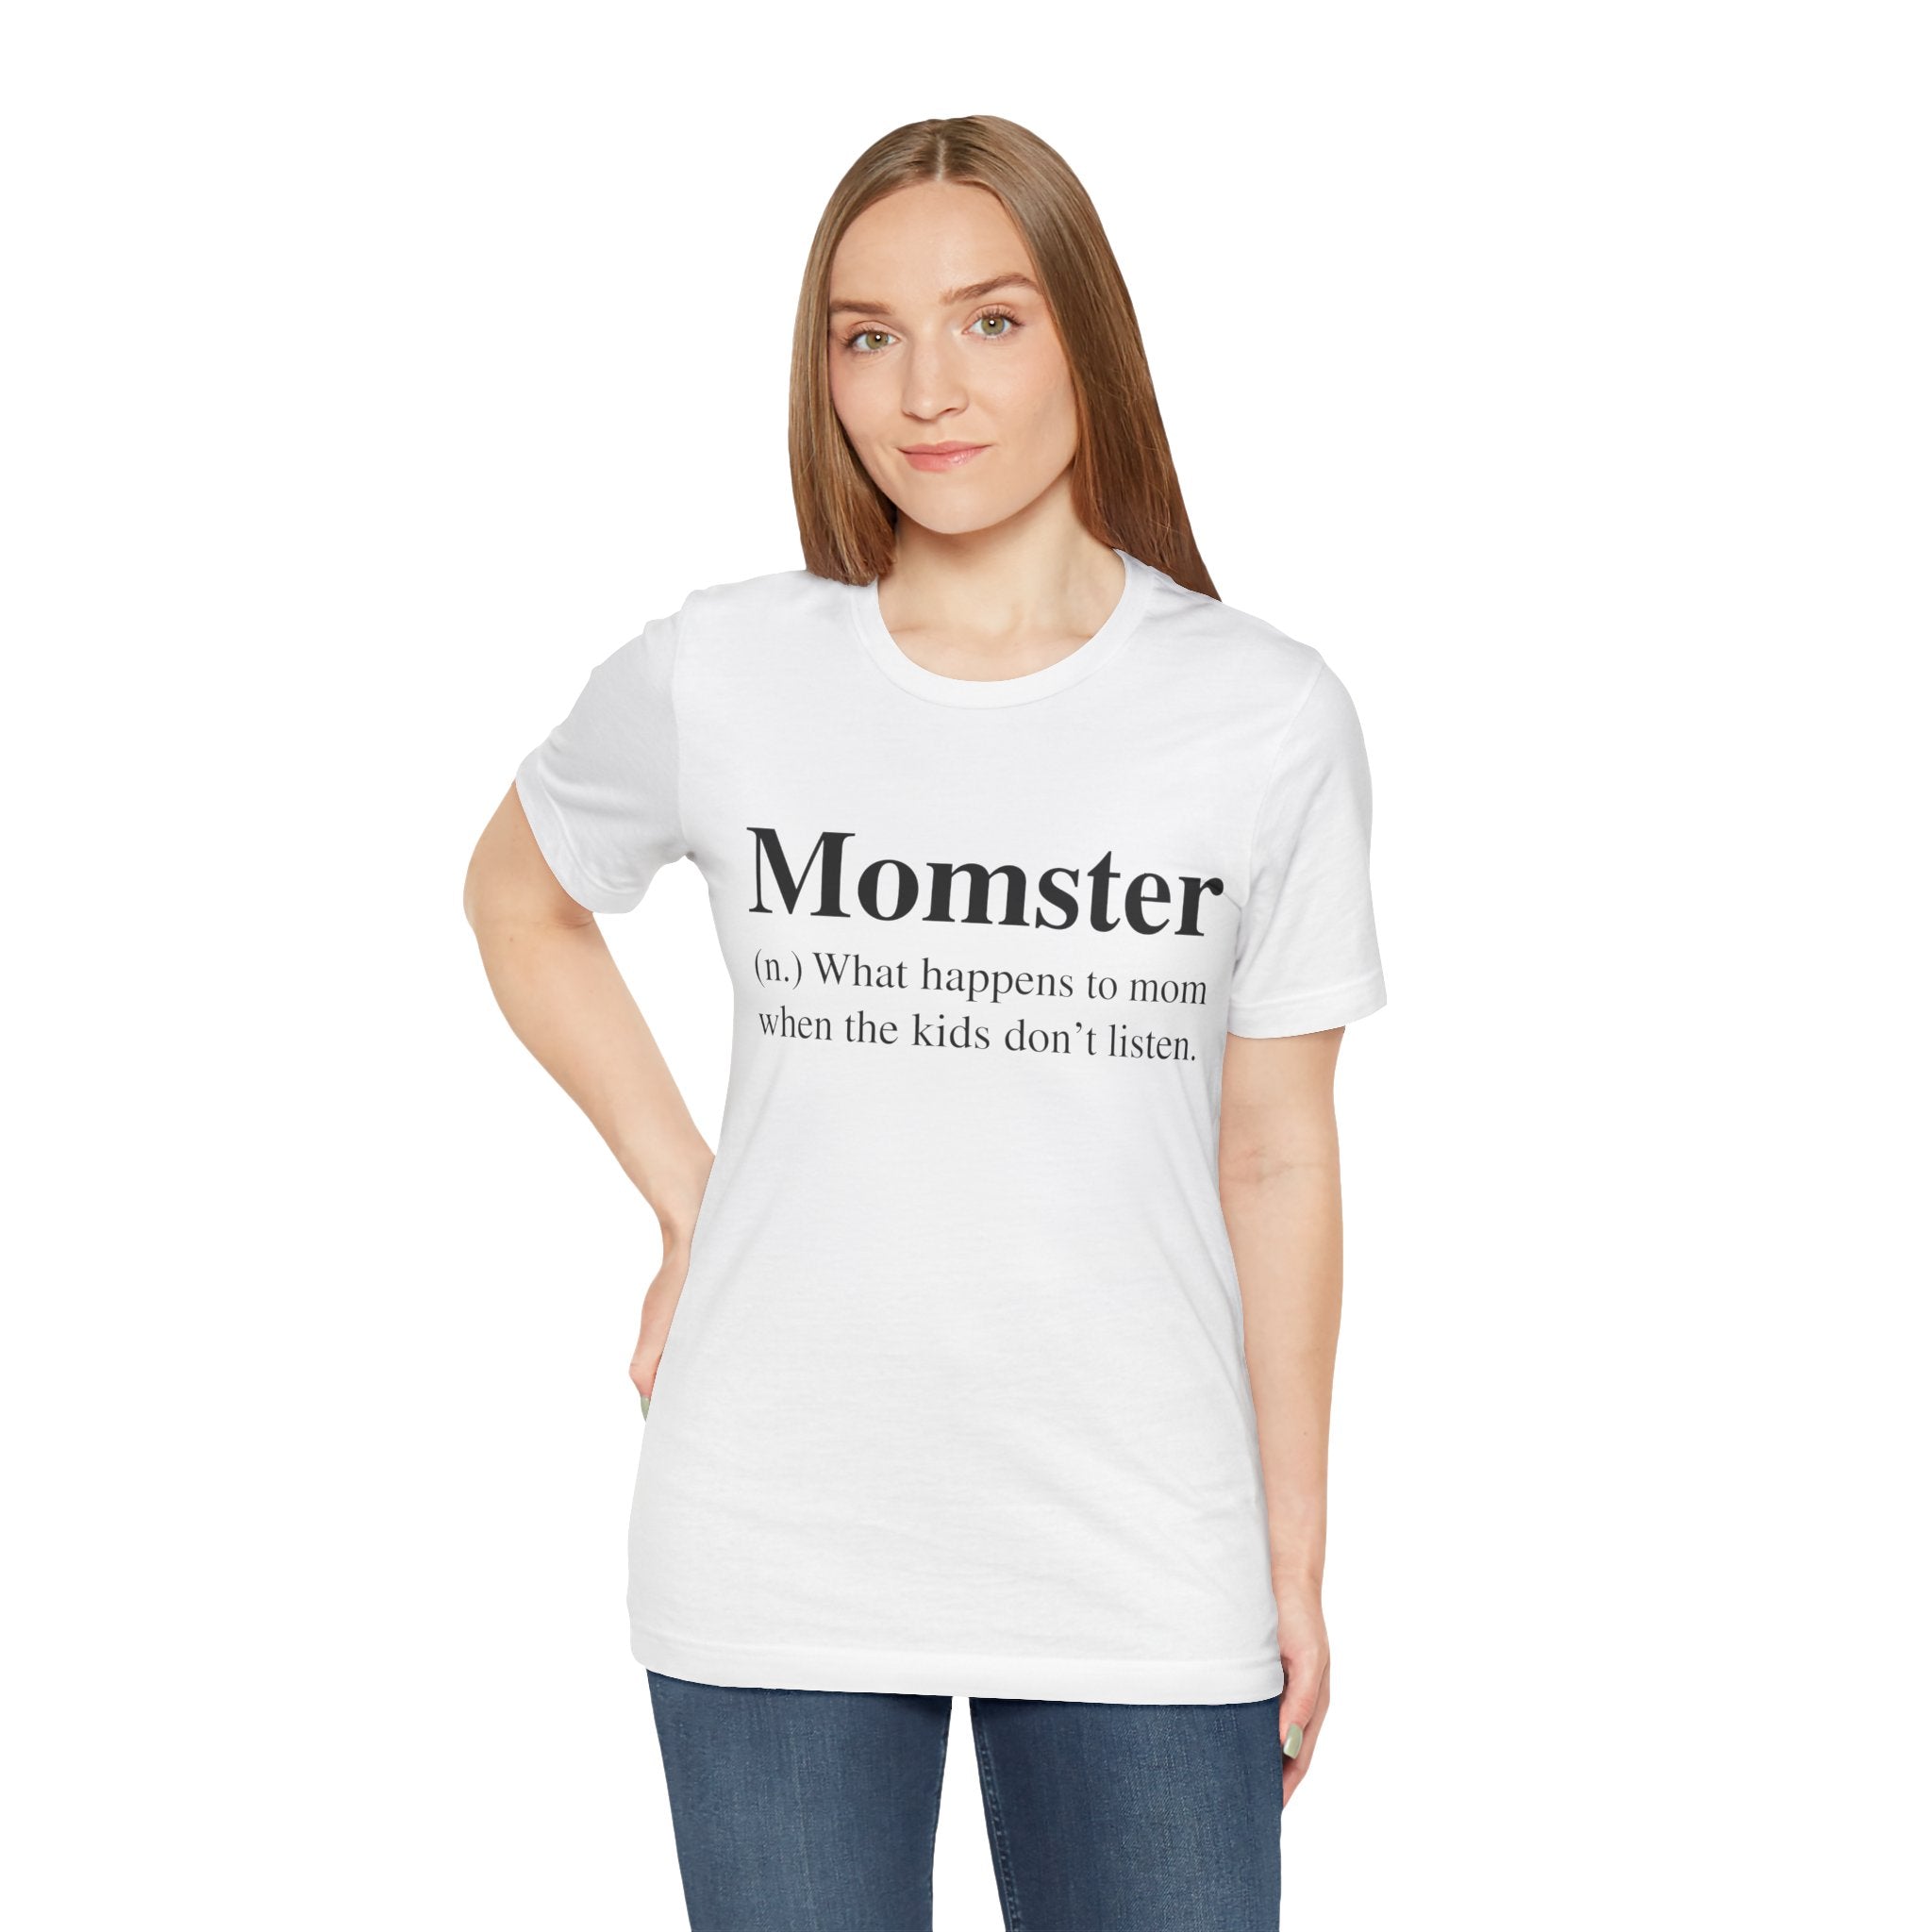 Woman in a Momster T-Shirt, standing against a plain background.